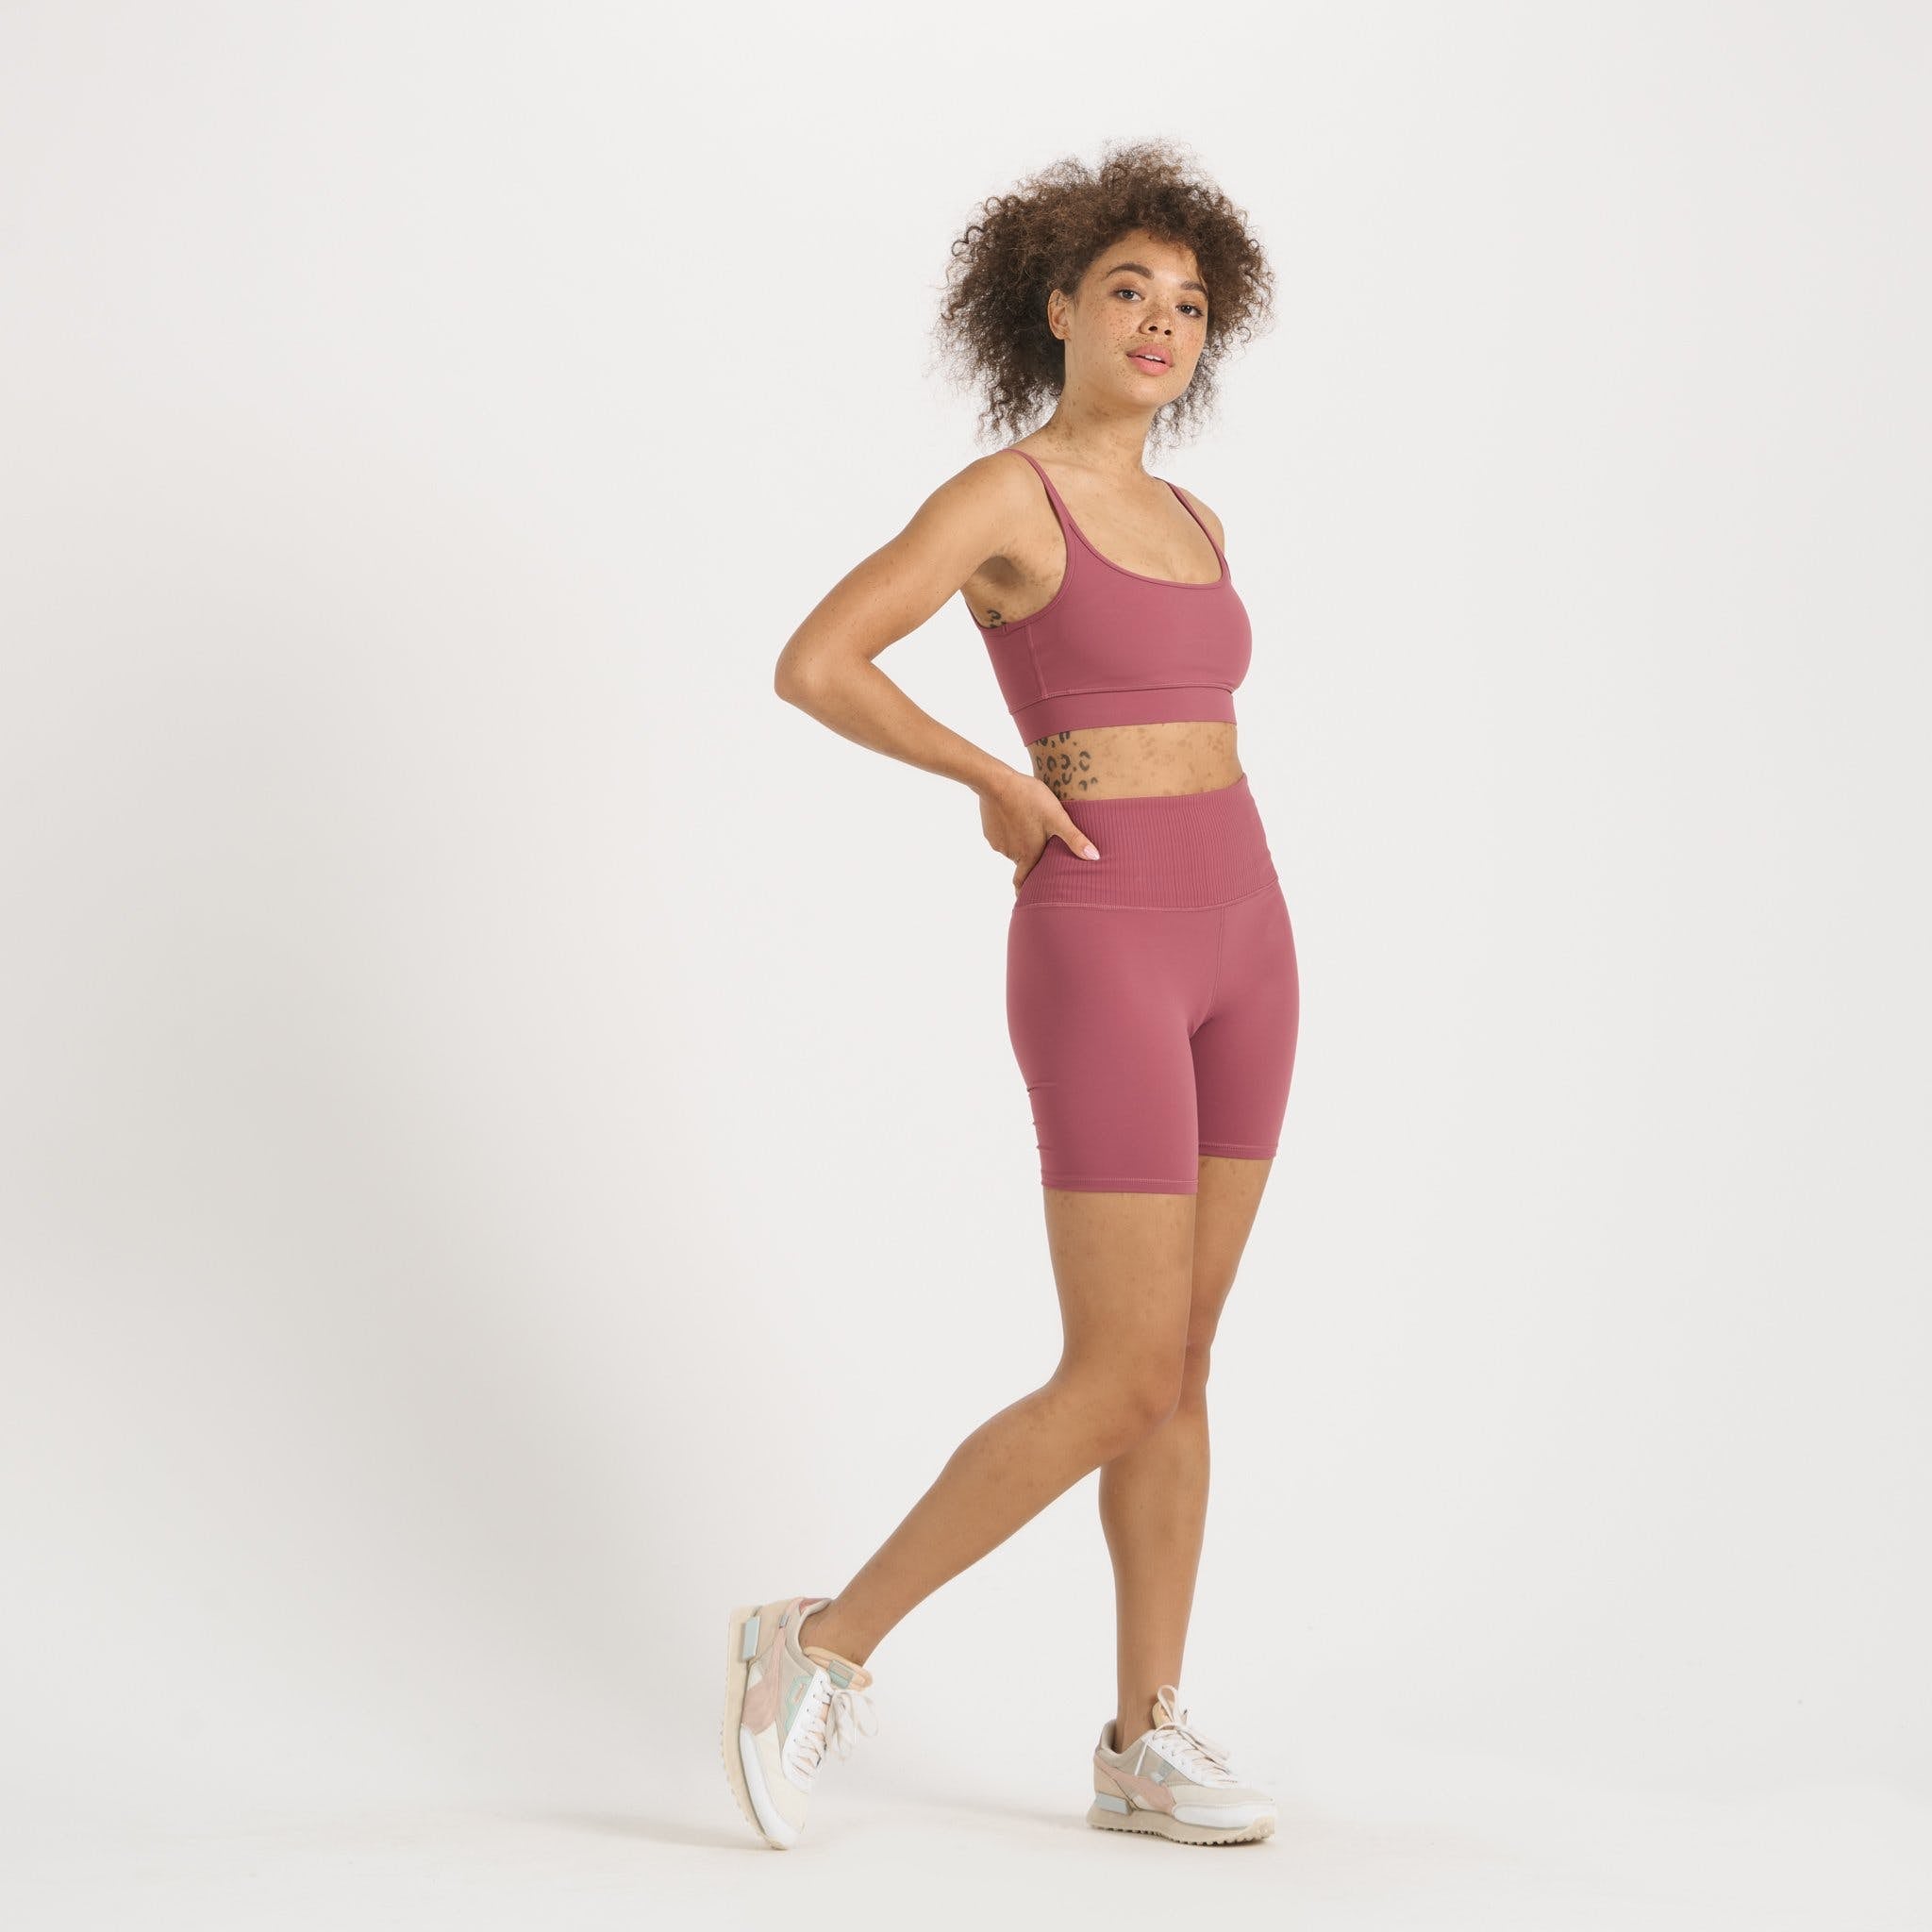 The Best Vuori Workout Clothes For Women